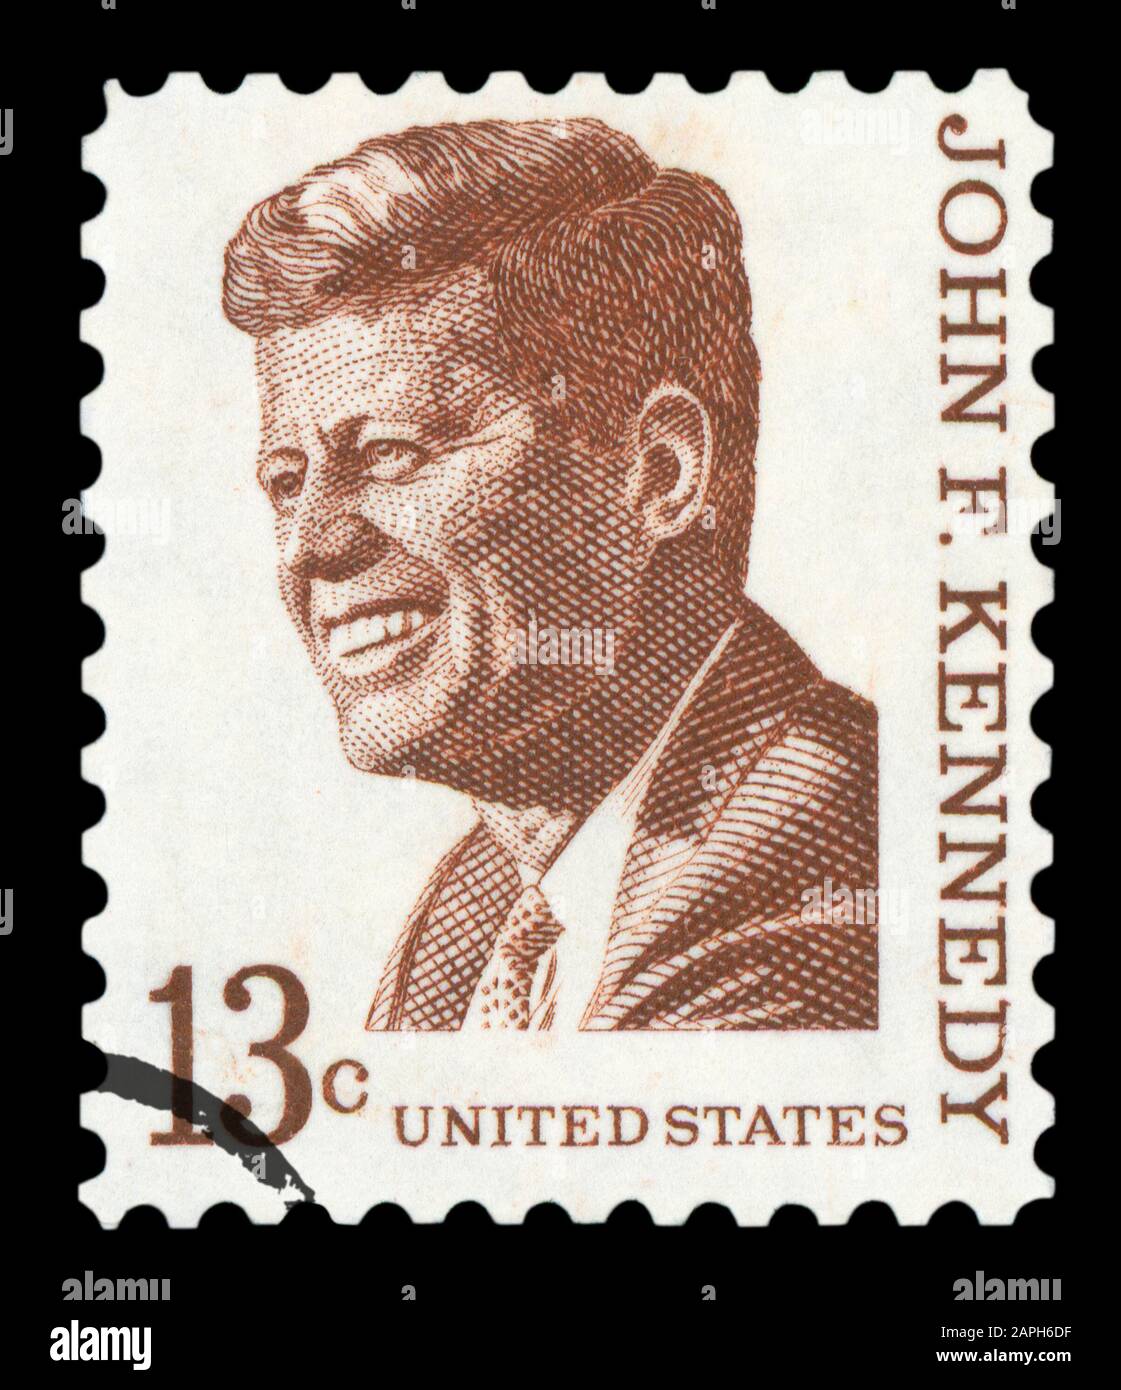 UNITED STATES OF AMERICA - CIRCA 1967: A used postage stamp printed in United States shows a portrait of the President John Fitzgerald Kennedy in brow Stock Photo